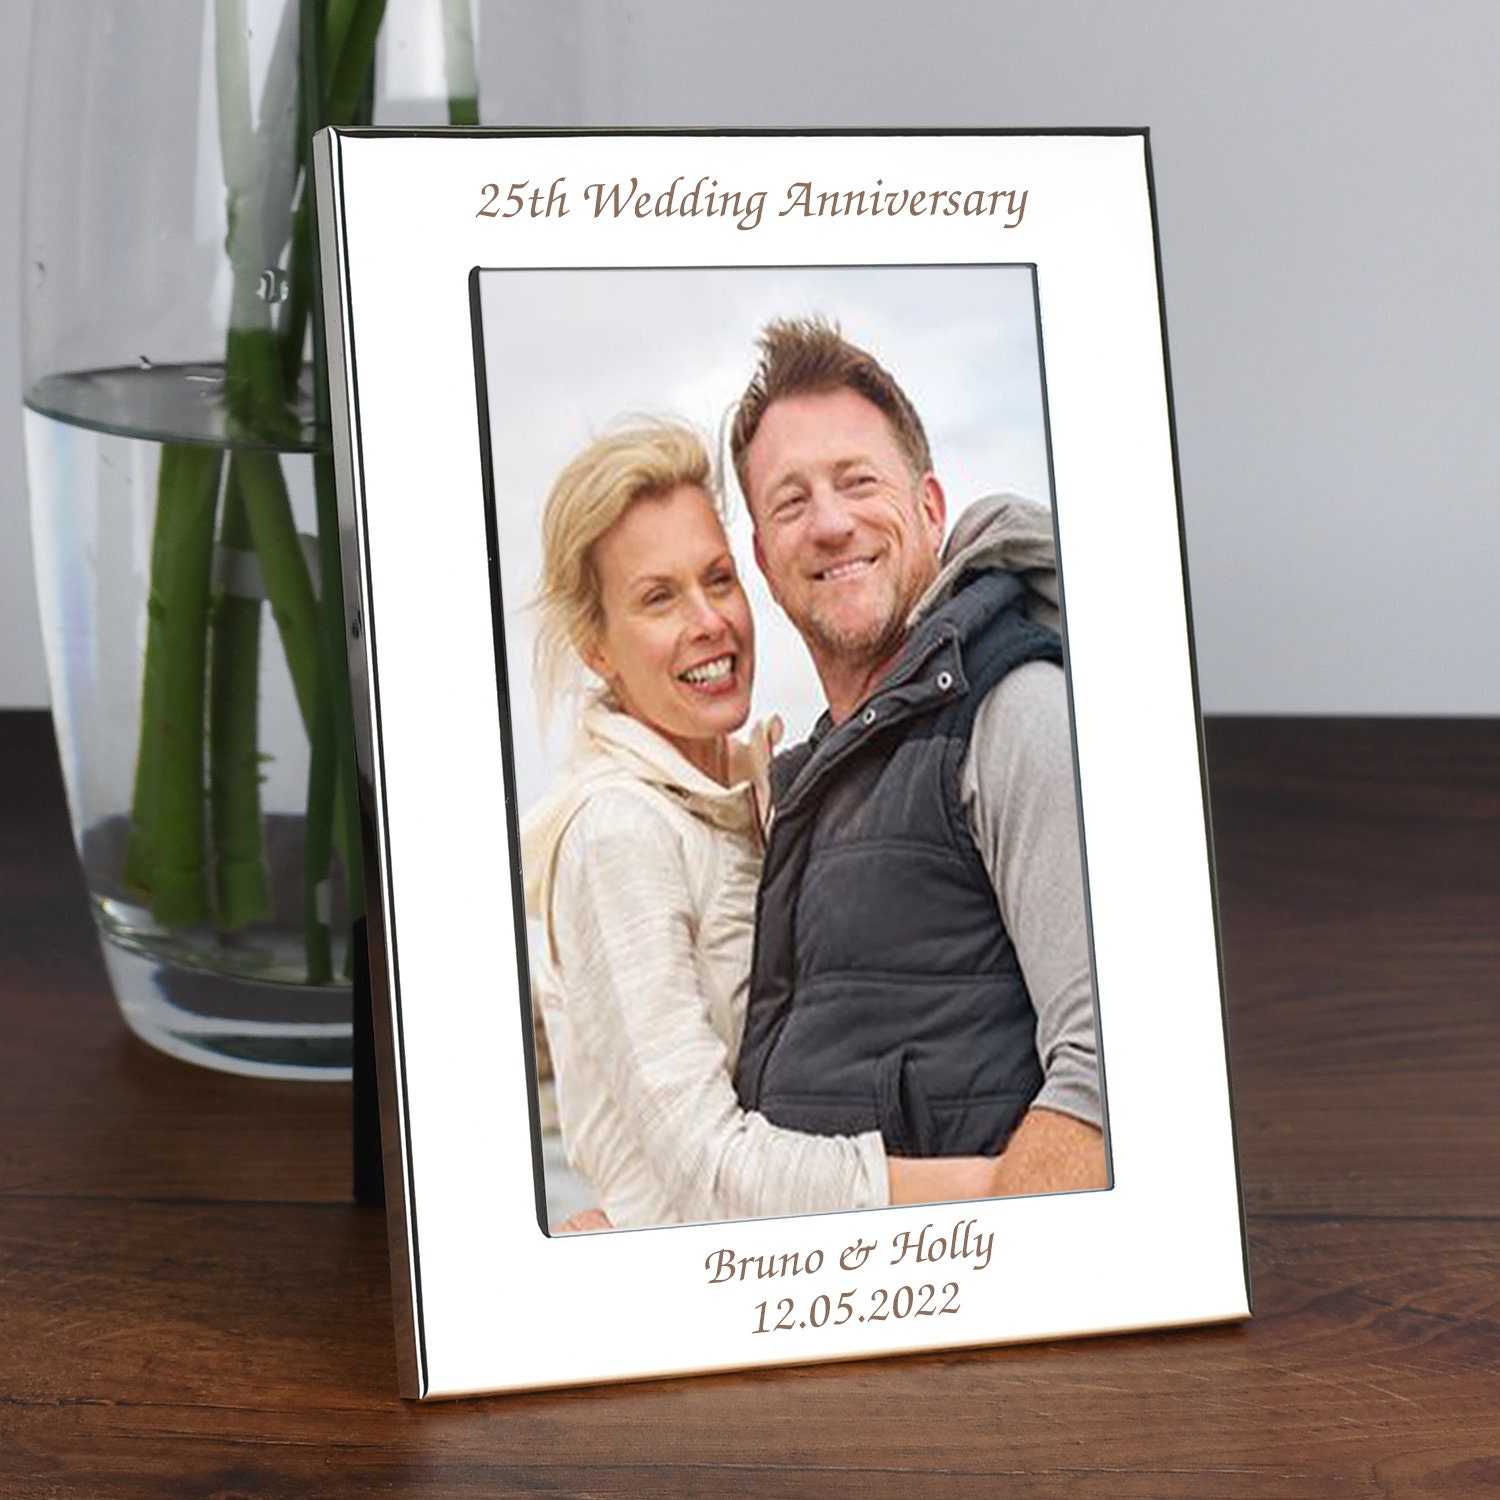 25th Wedding Anniversary Gifts Personalised Silver Wedding Anniversary Gifts  for Husband, Wife, Mum, Dad, Parents 25 Years Married Gift -  Norway